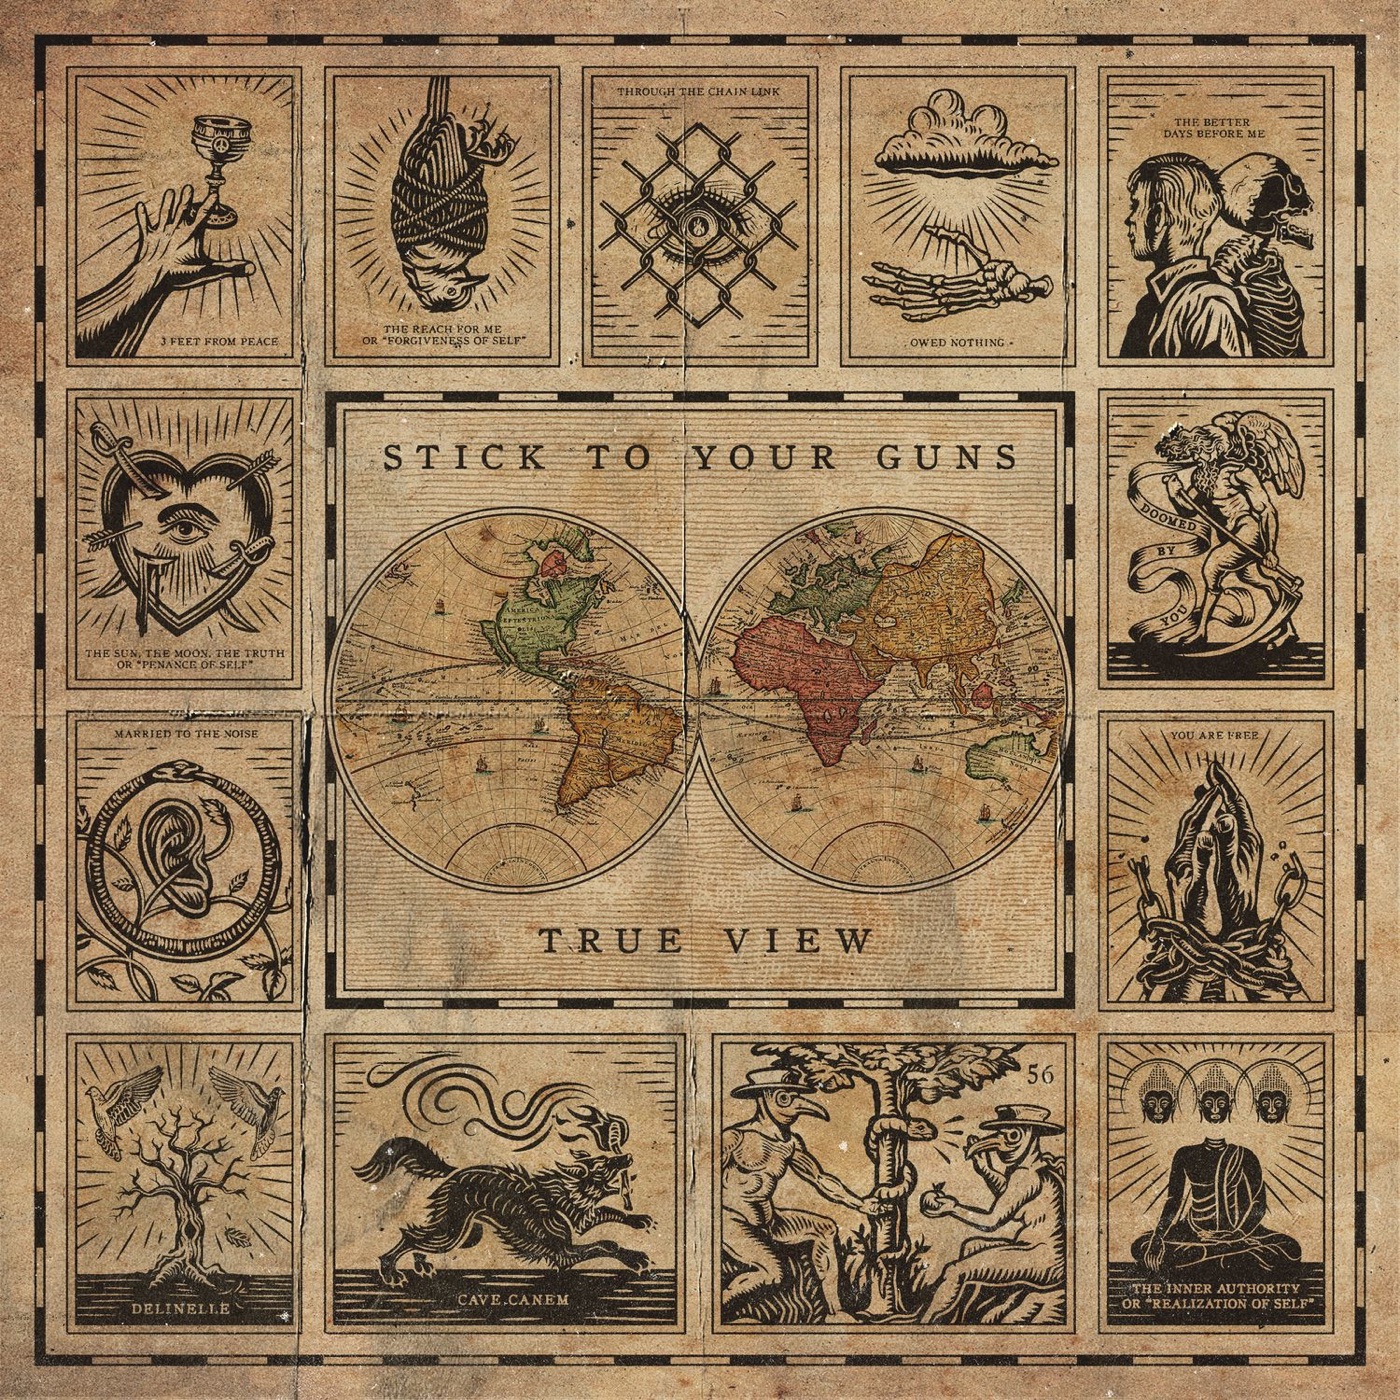 True View by Stick To Your Guns